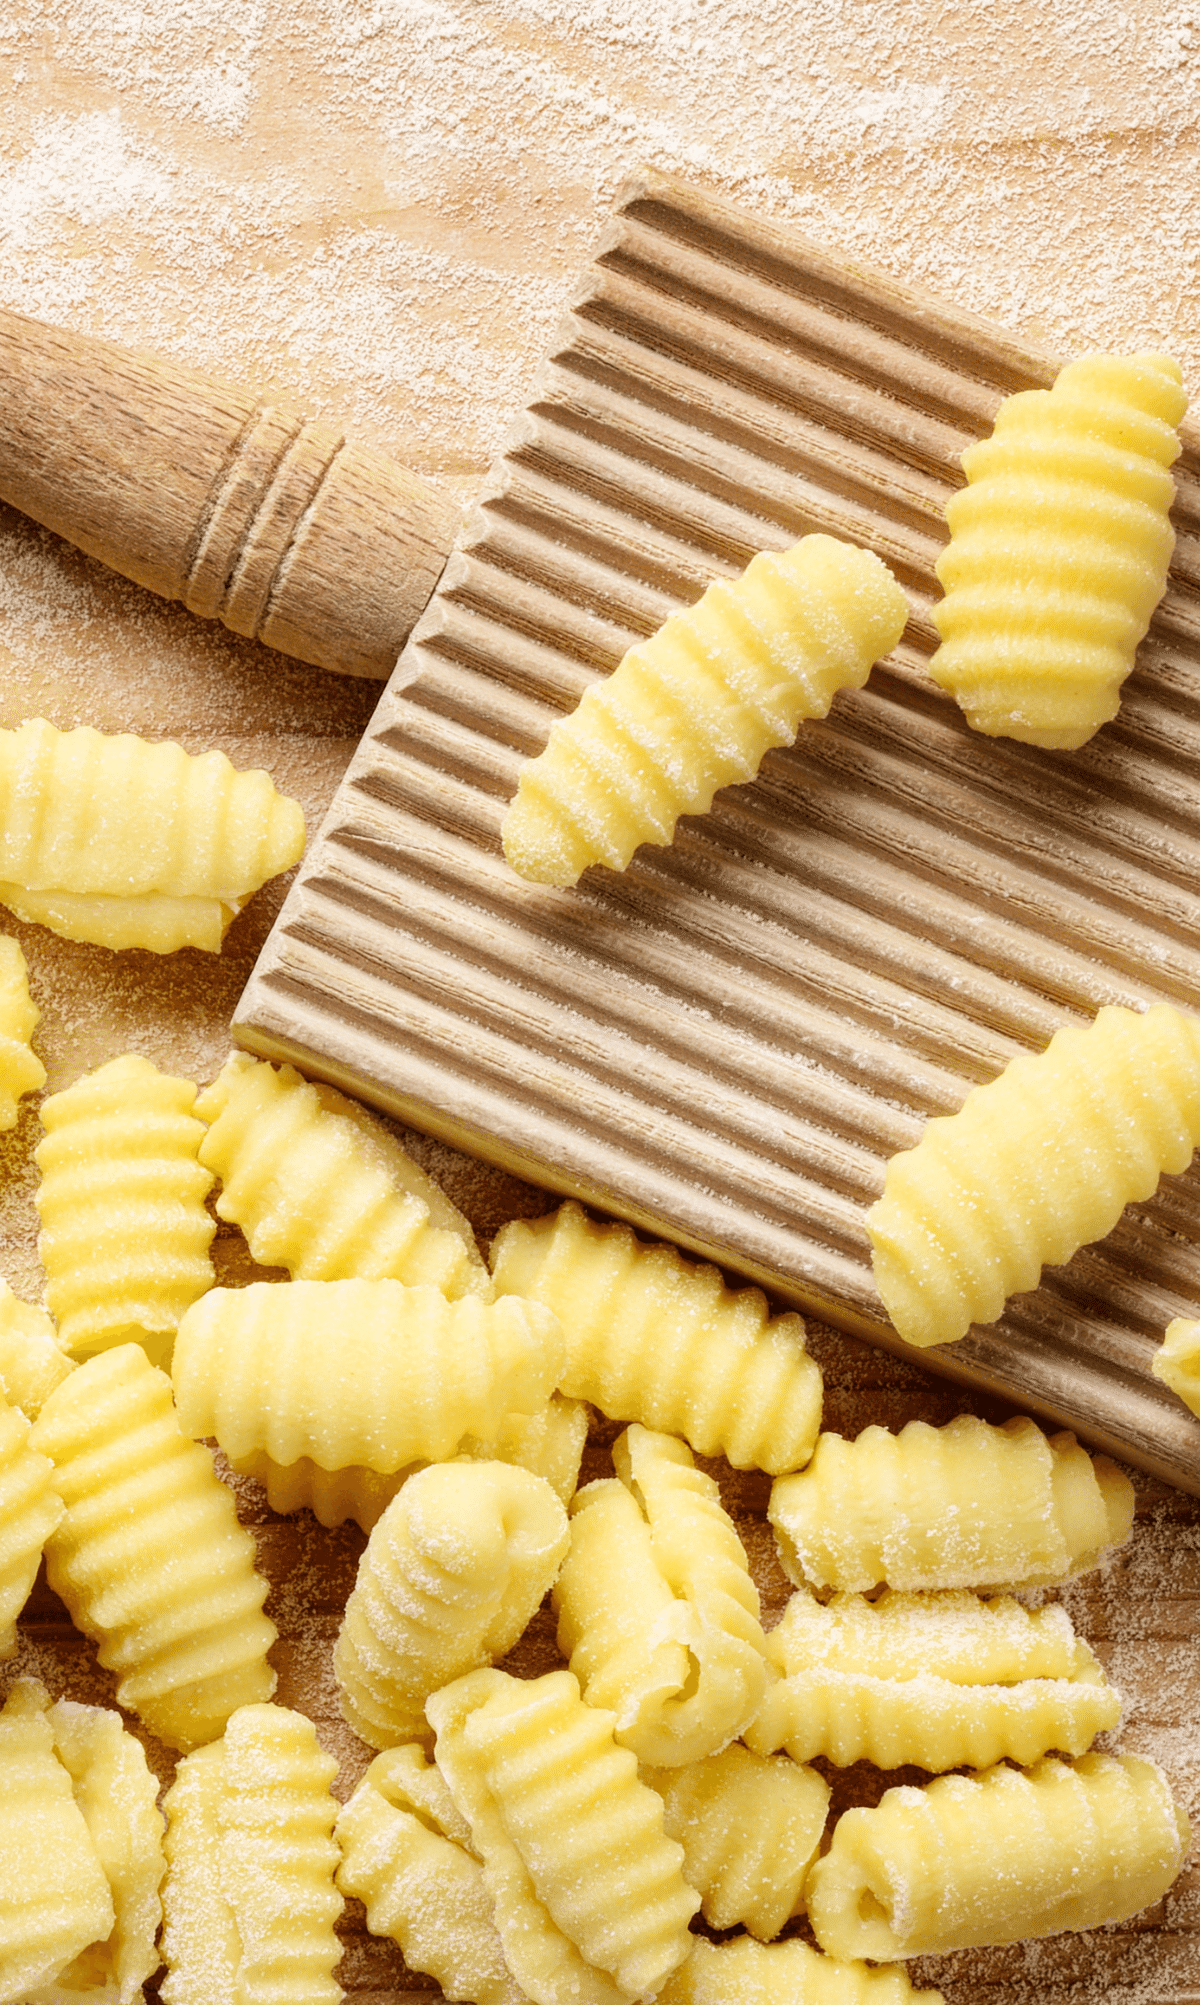 The Best Gnocchi Board for Your Needs